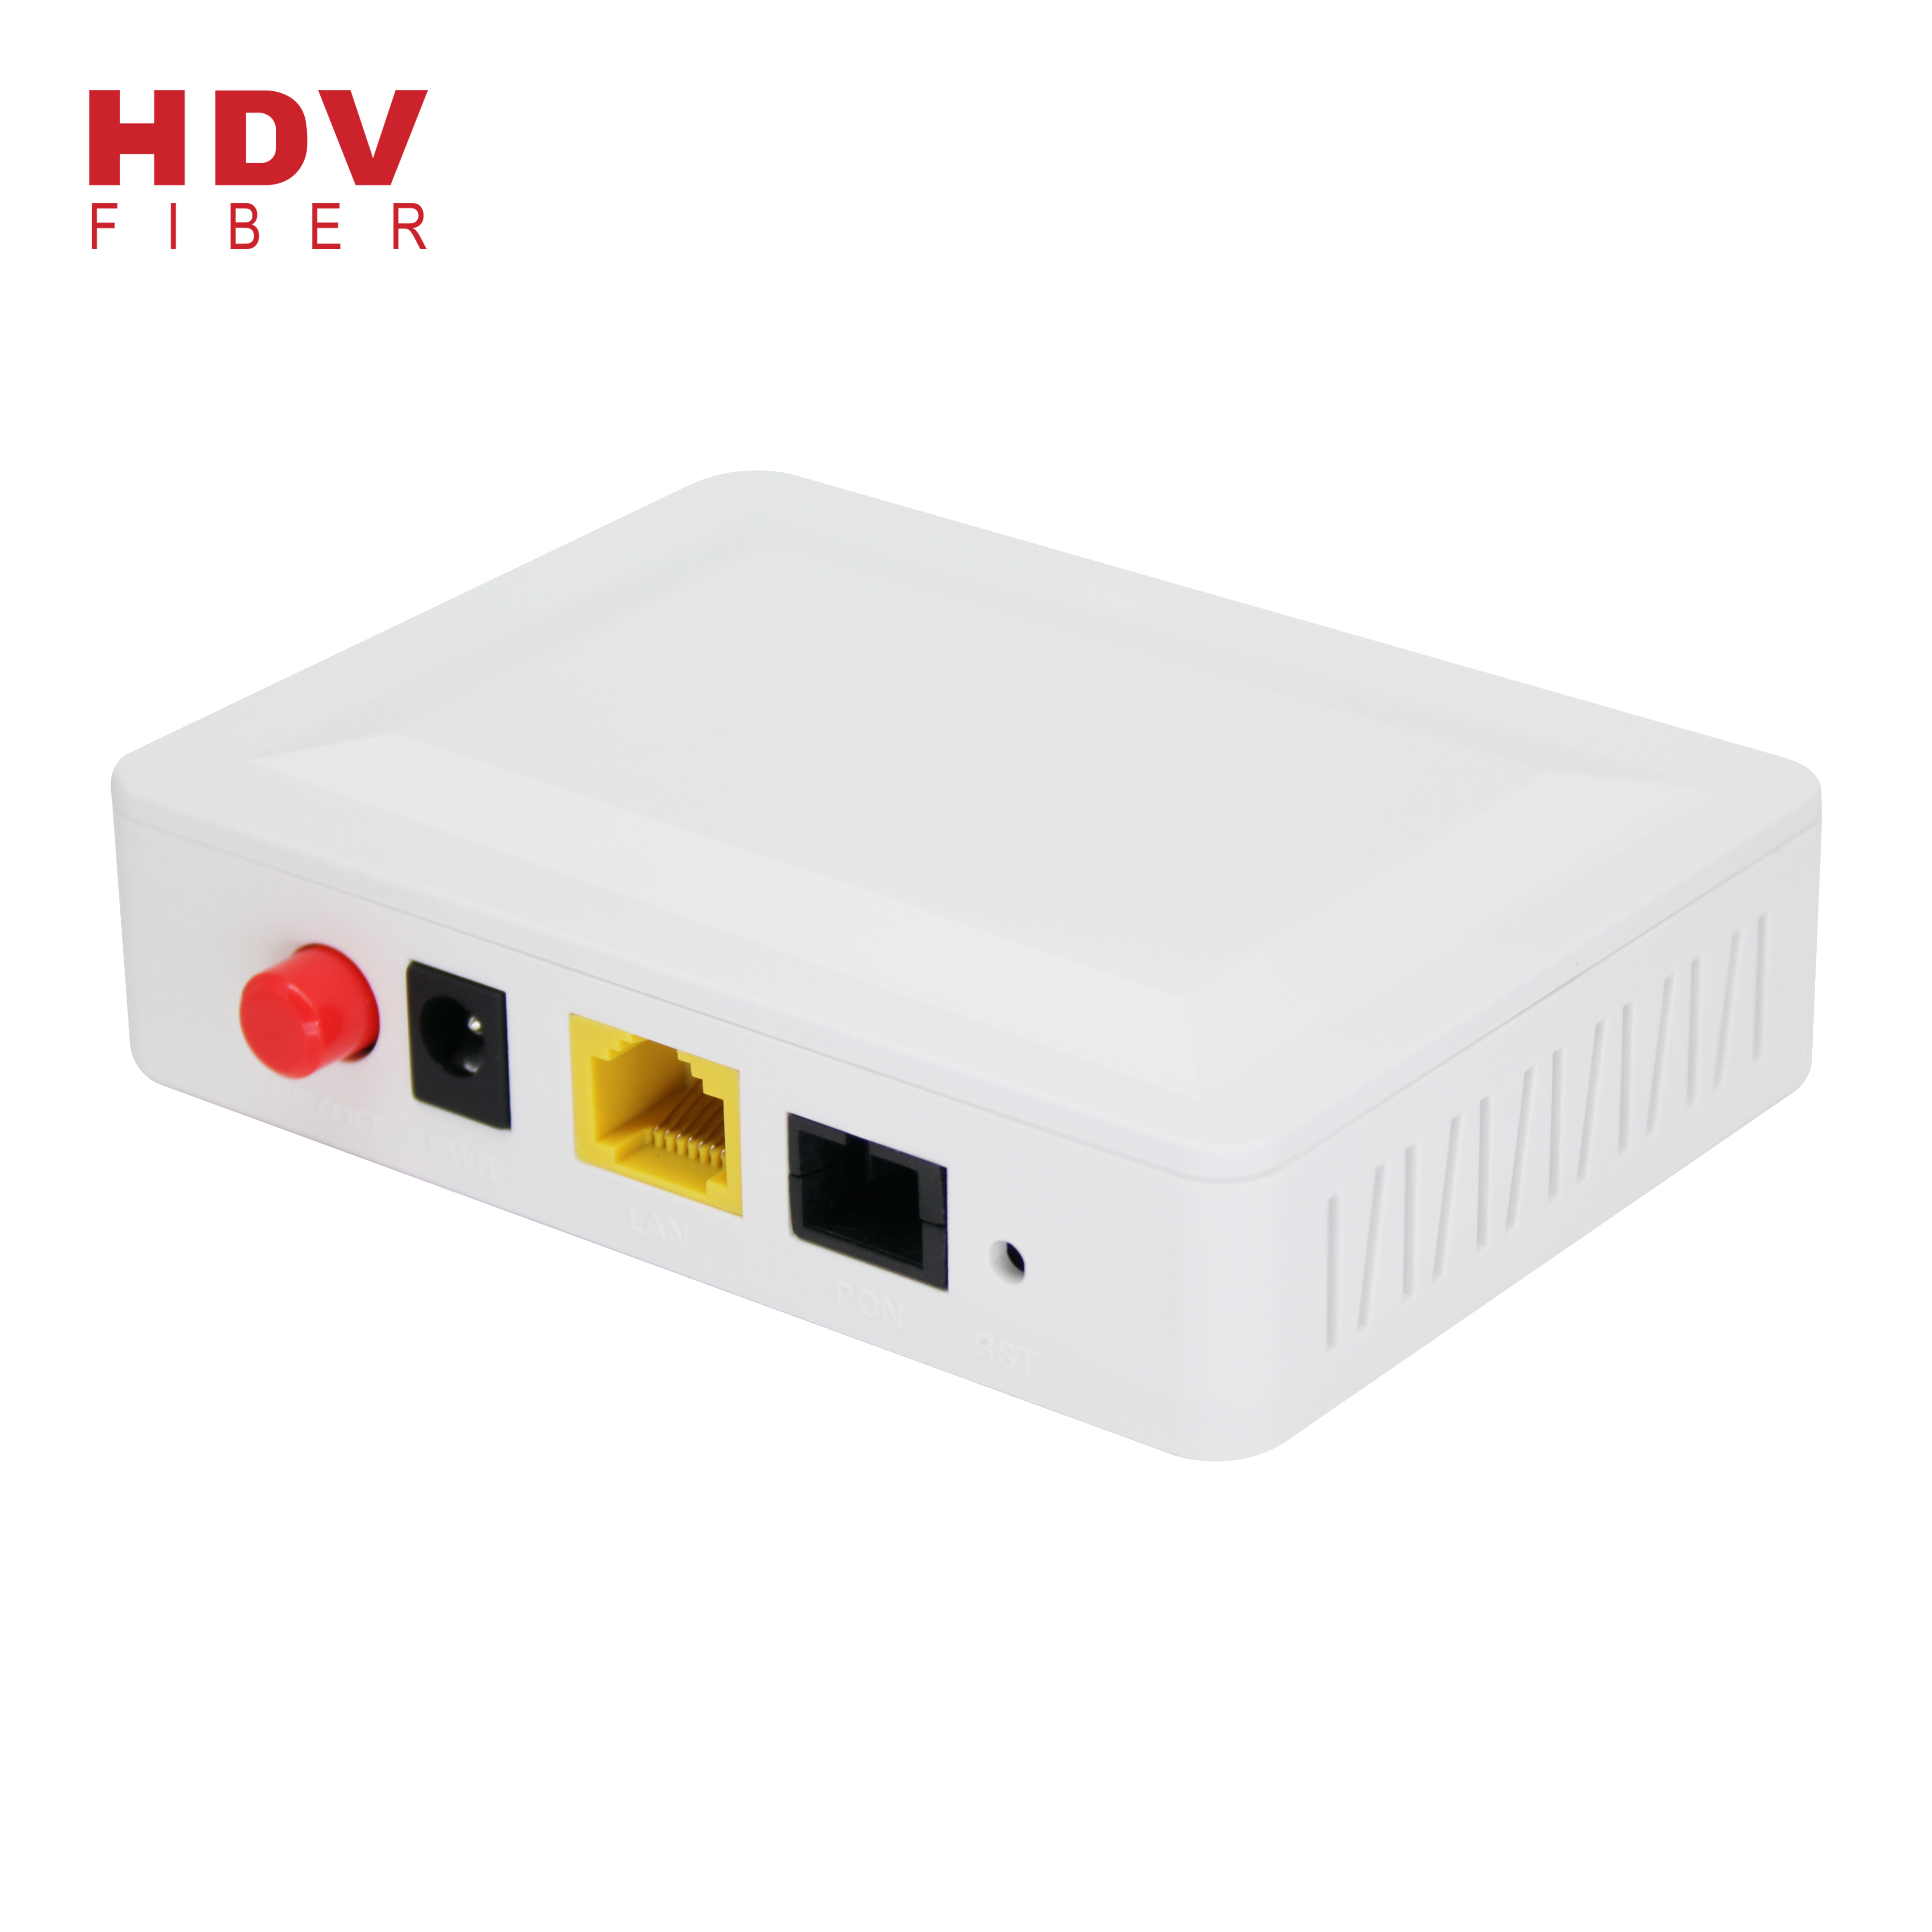 Phyhome Onu - Wholesale FTTH Router 1GE 1.25G ZTE Huawei GPON ONU ONT – HDV